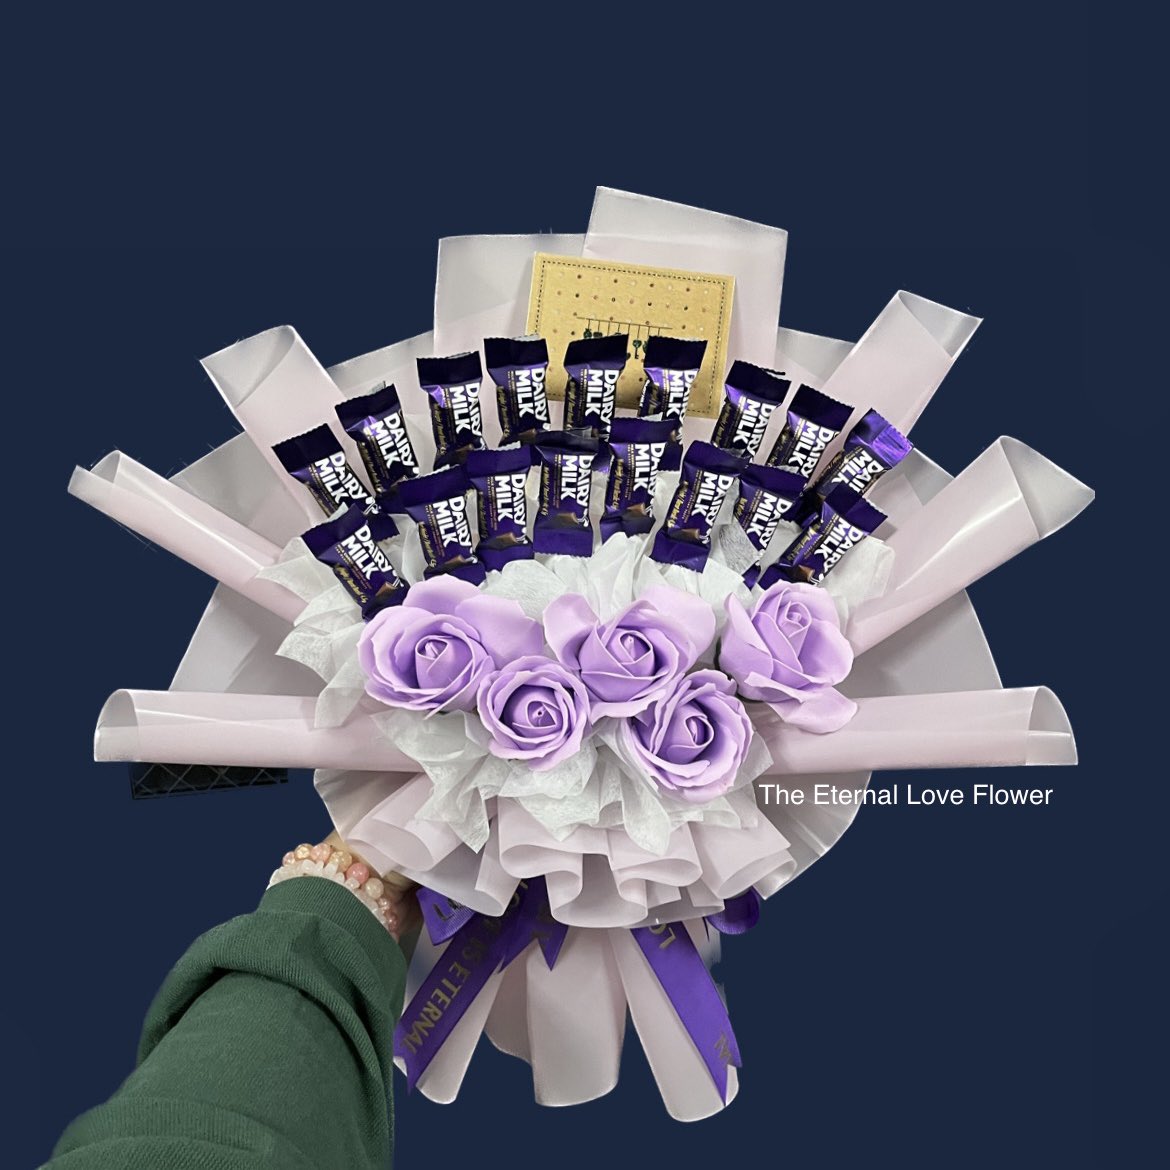 Got someone on your mind all the time but you got super shy? Super shy to let them know your feeling? 

We can help you convey your sweet message 💜

Free wish card provided for every bouquet 💐 

#chocolatebouquet #surprisedelivery #surpriseplanner #chocolatebouquetKL